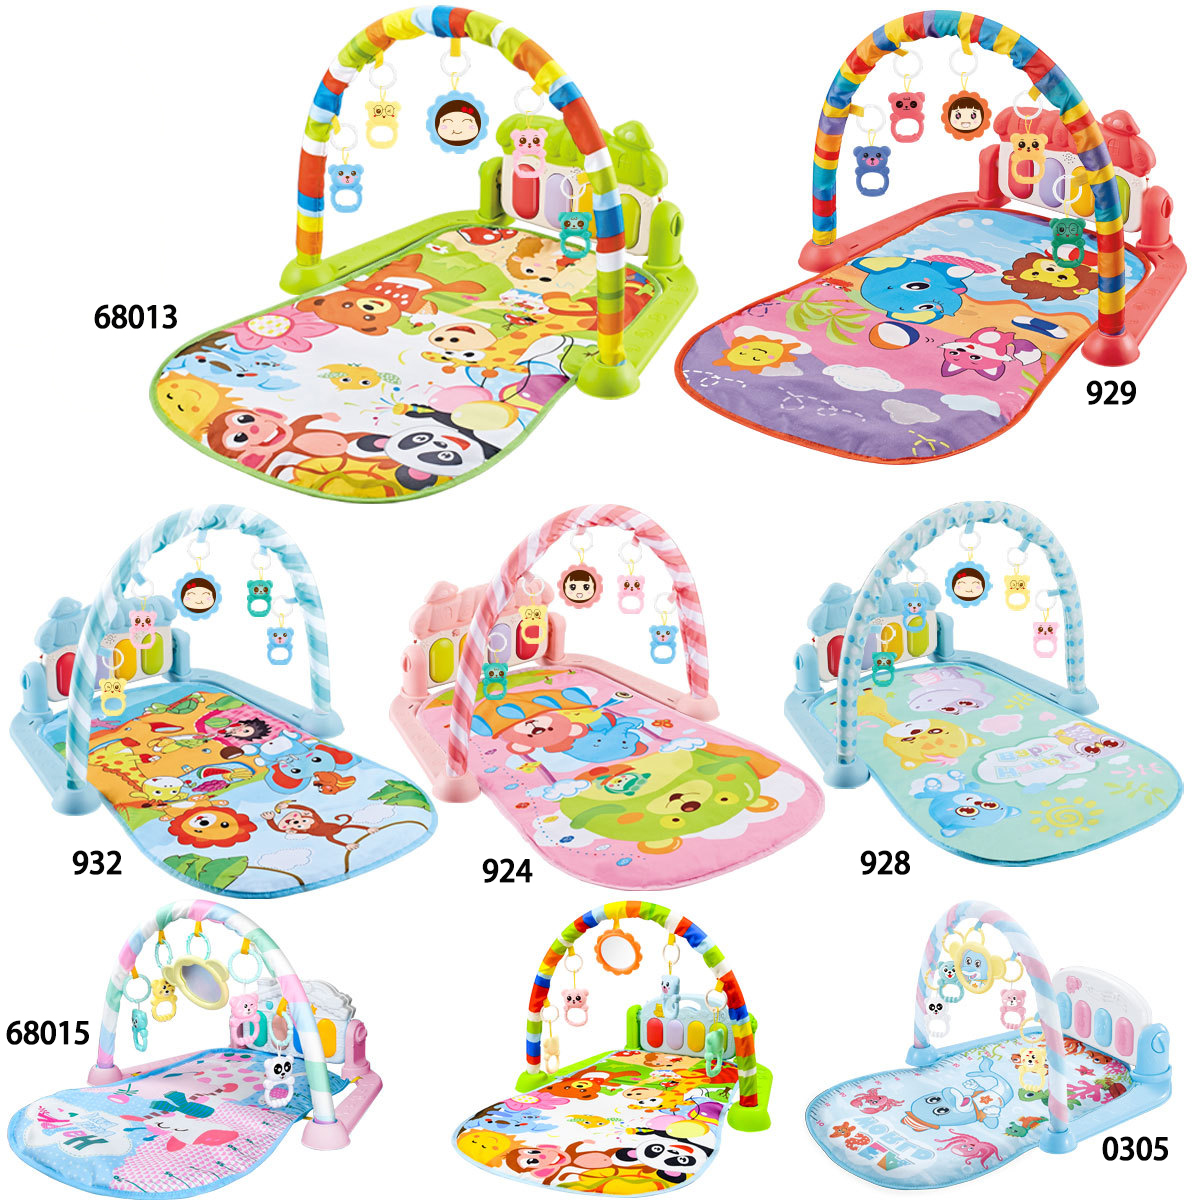 Baby Piano Gym 0315